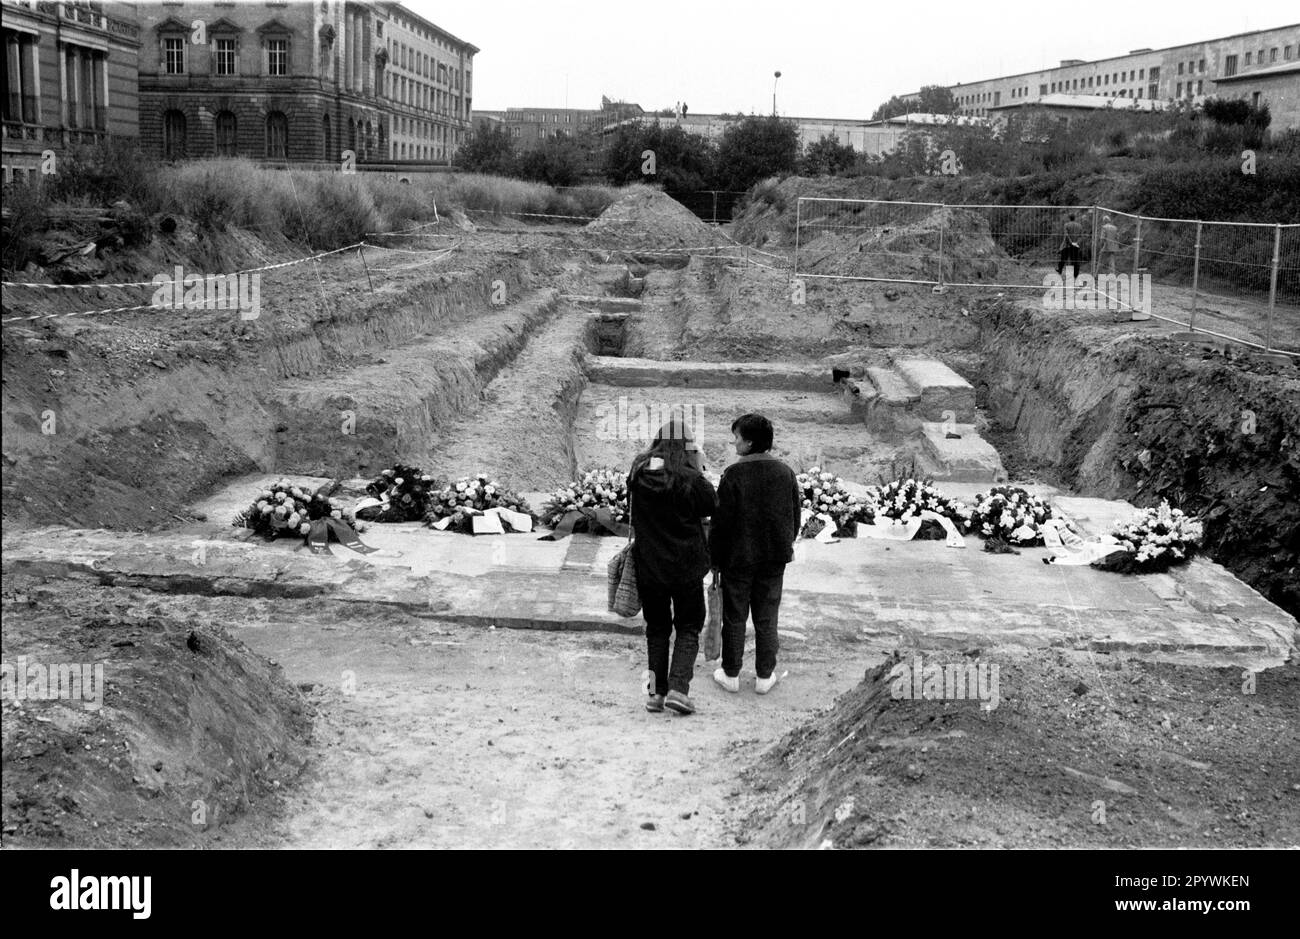 Berlin-Bezirke / History / 5.5.1985 Kreuzberg: A citizens' initiative -Aktives Museum- digs for cellars of the former Gestapo headquarters on a piece of rubble at the Gropiusbau to uncover buried history. // Nazi / Police / Monument / Views [automated translation] Stock Photo